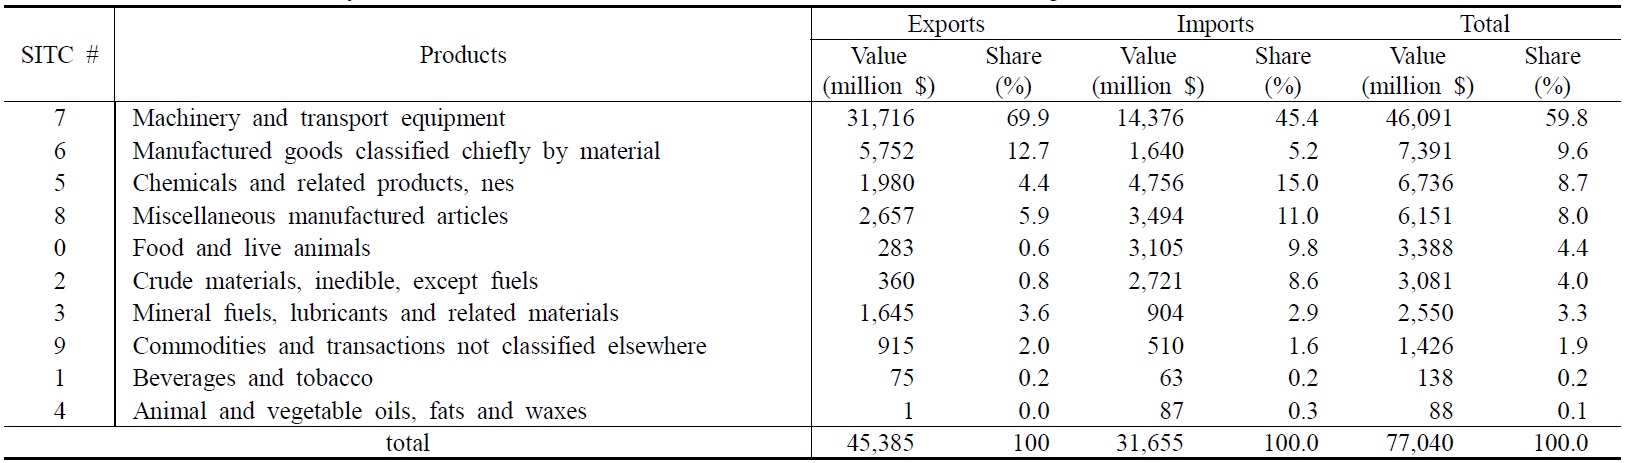 Bilateral Commodity Trade between Korea and the United States, 2005-09 Average (million $)